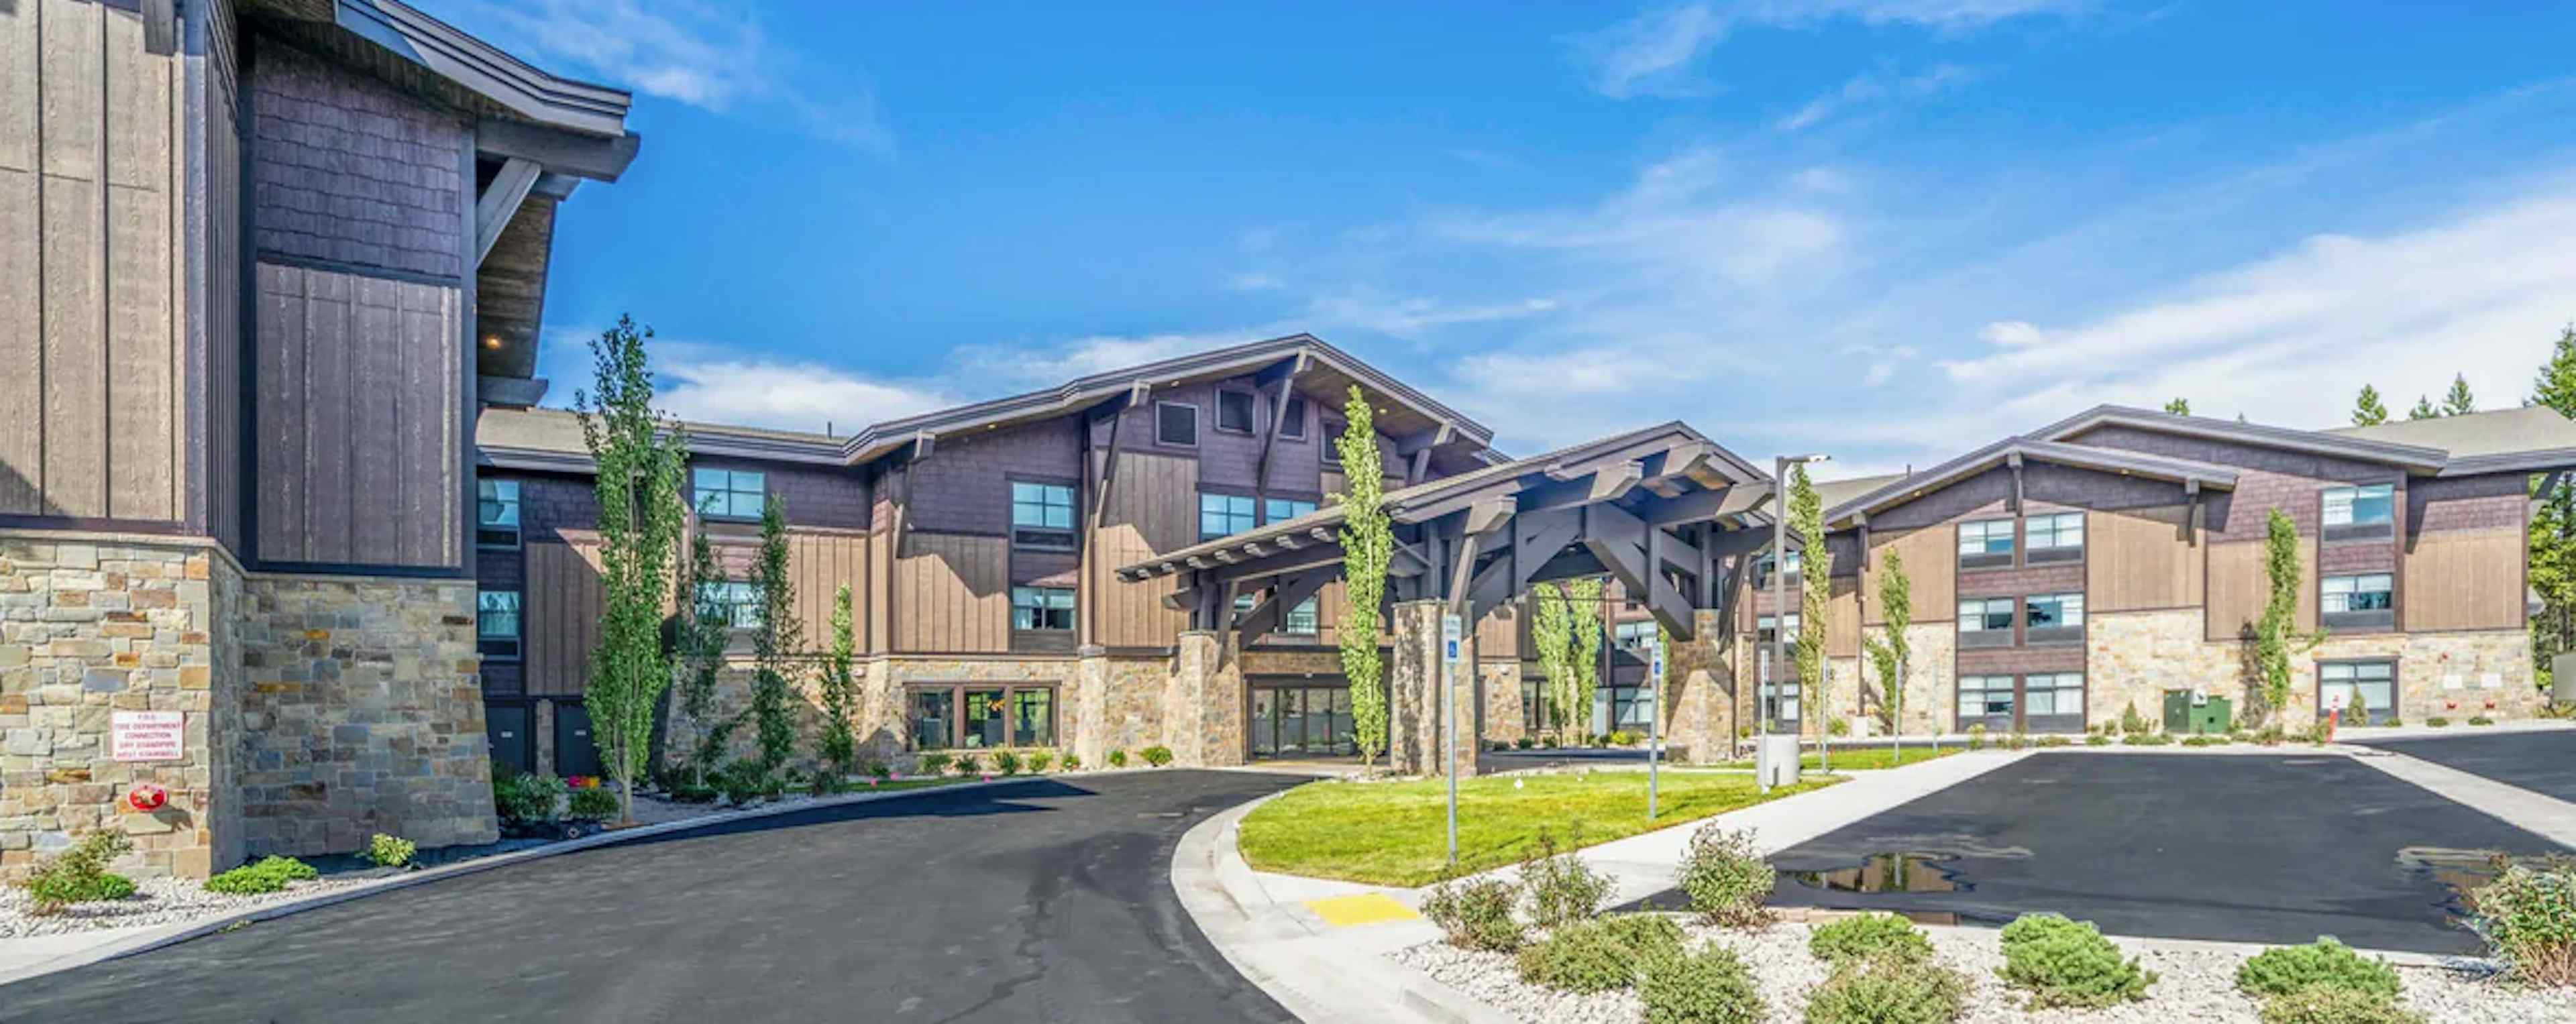 External view of the brand new SpringHill Suites hotel by Marriott, located just outside of Yellowstone National Park of the Yellowstone Teton Territory